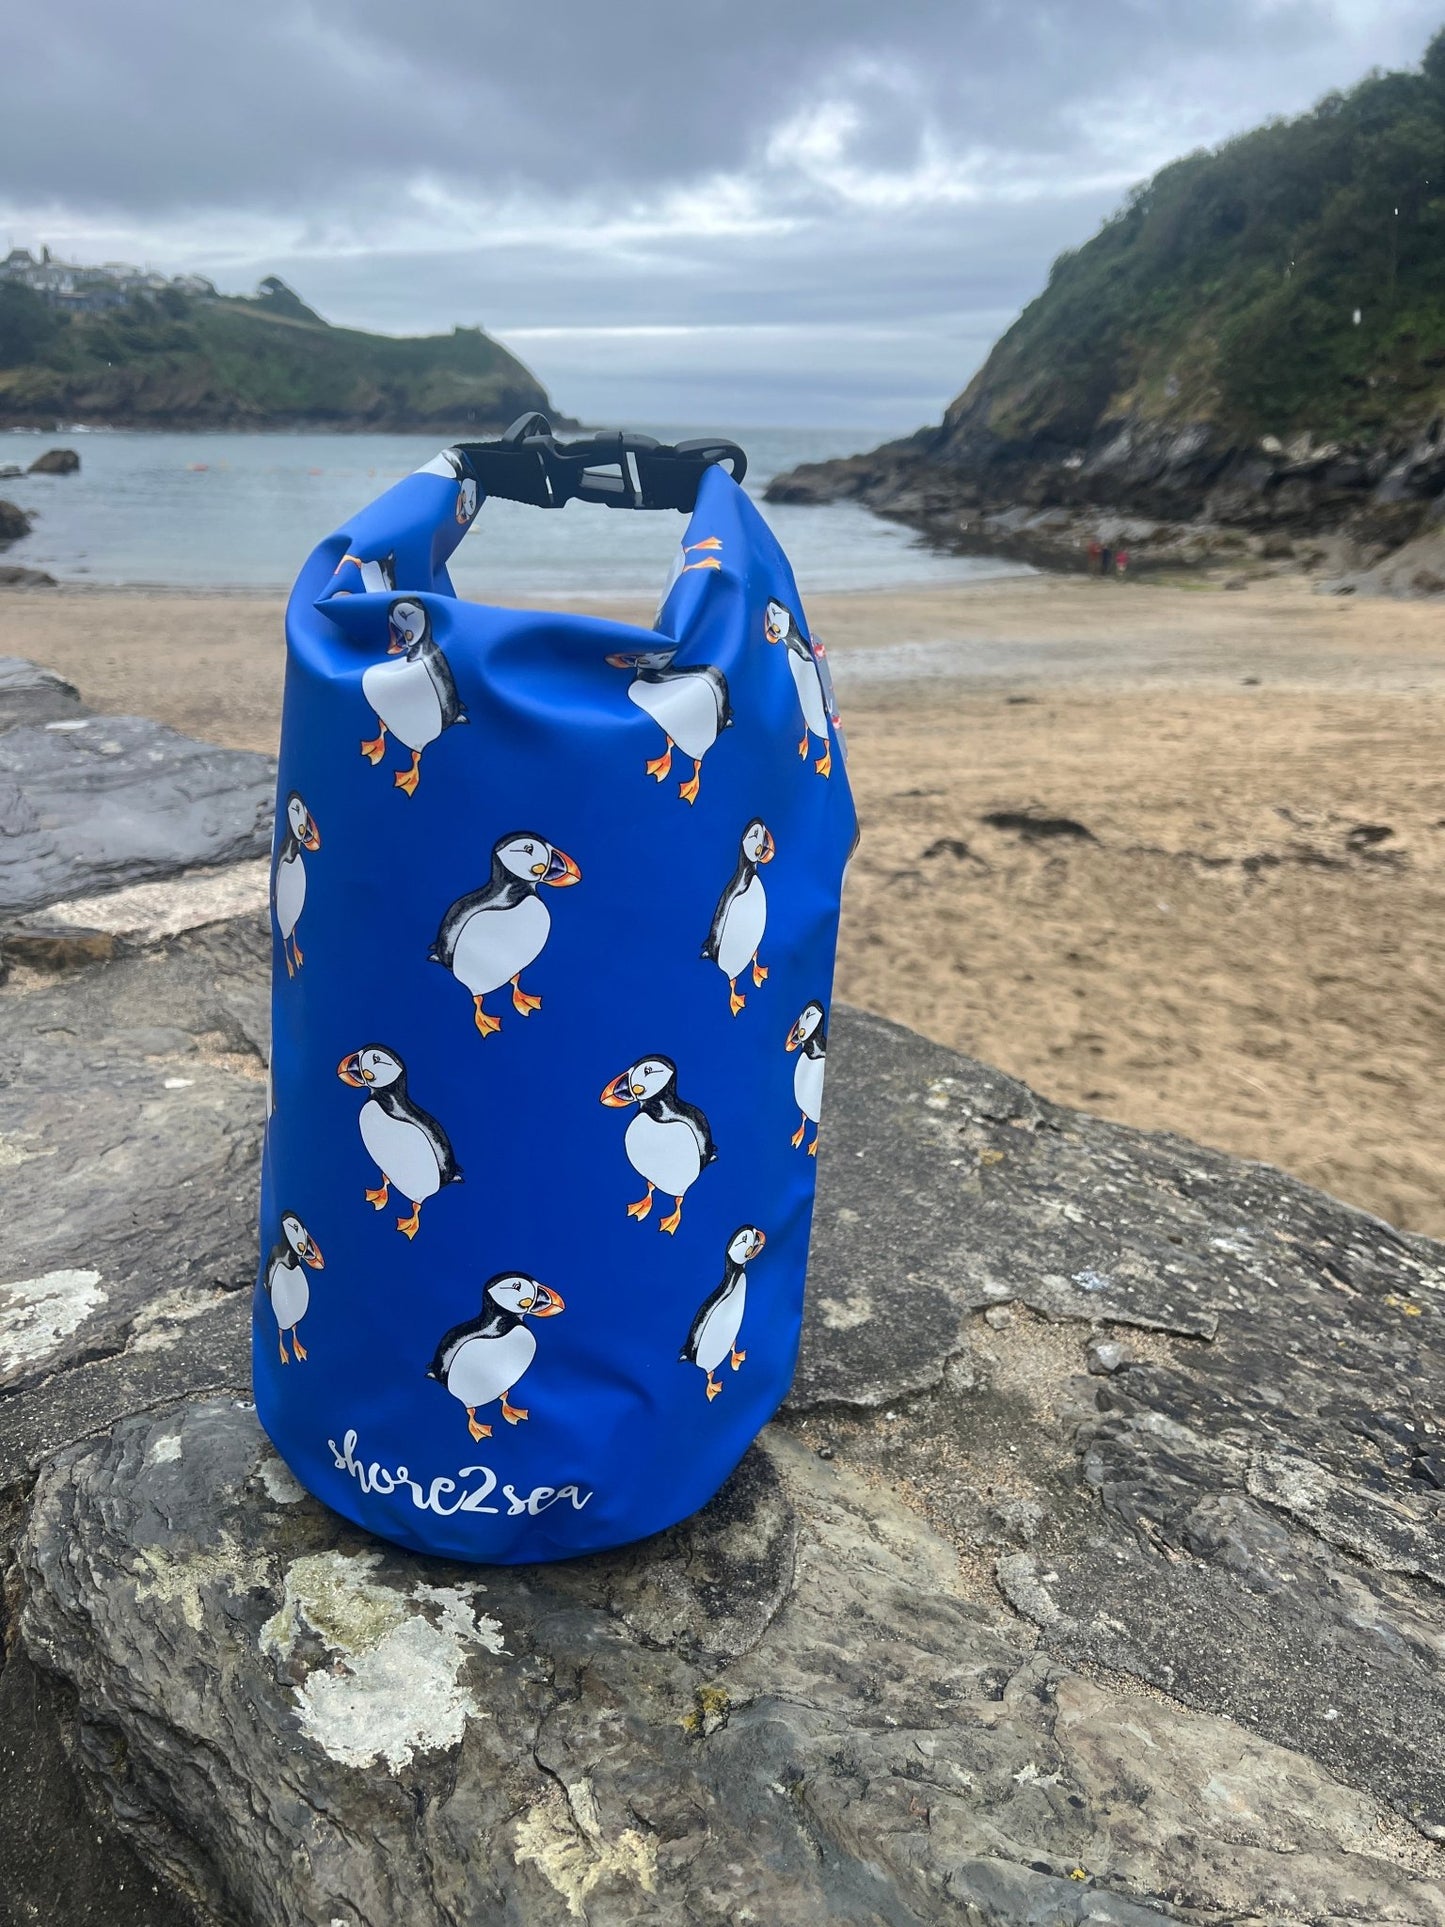 Funky Nautical Patterned Waterproof 15l Drybag: Crab, Lobster, Seagull, Puffins - Readymoney Beach Shop